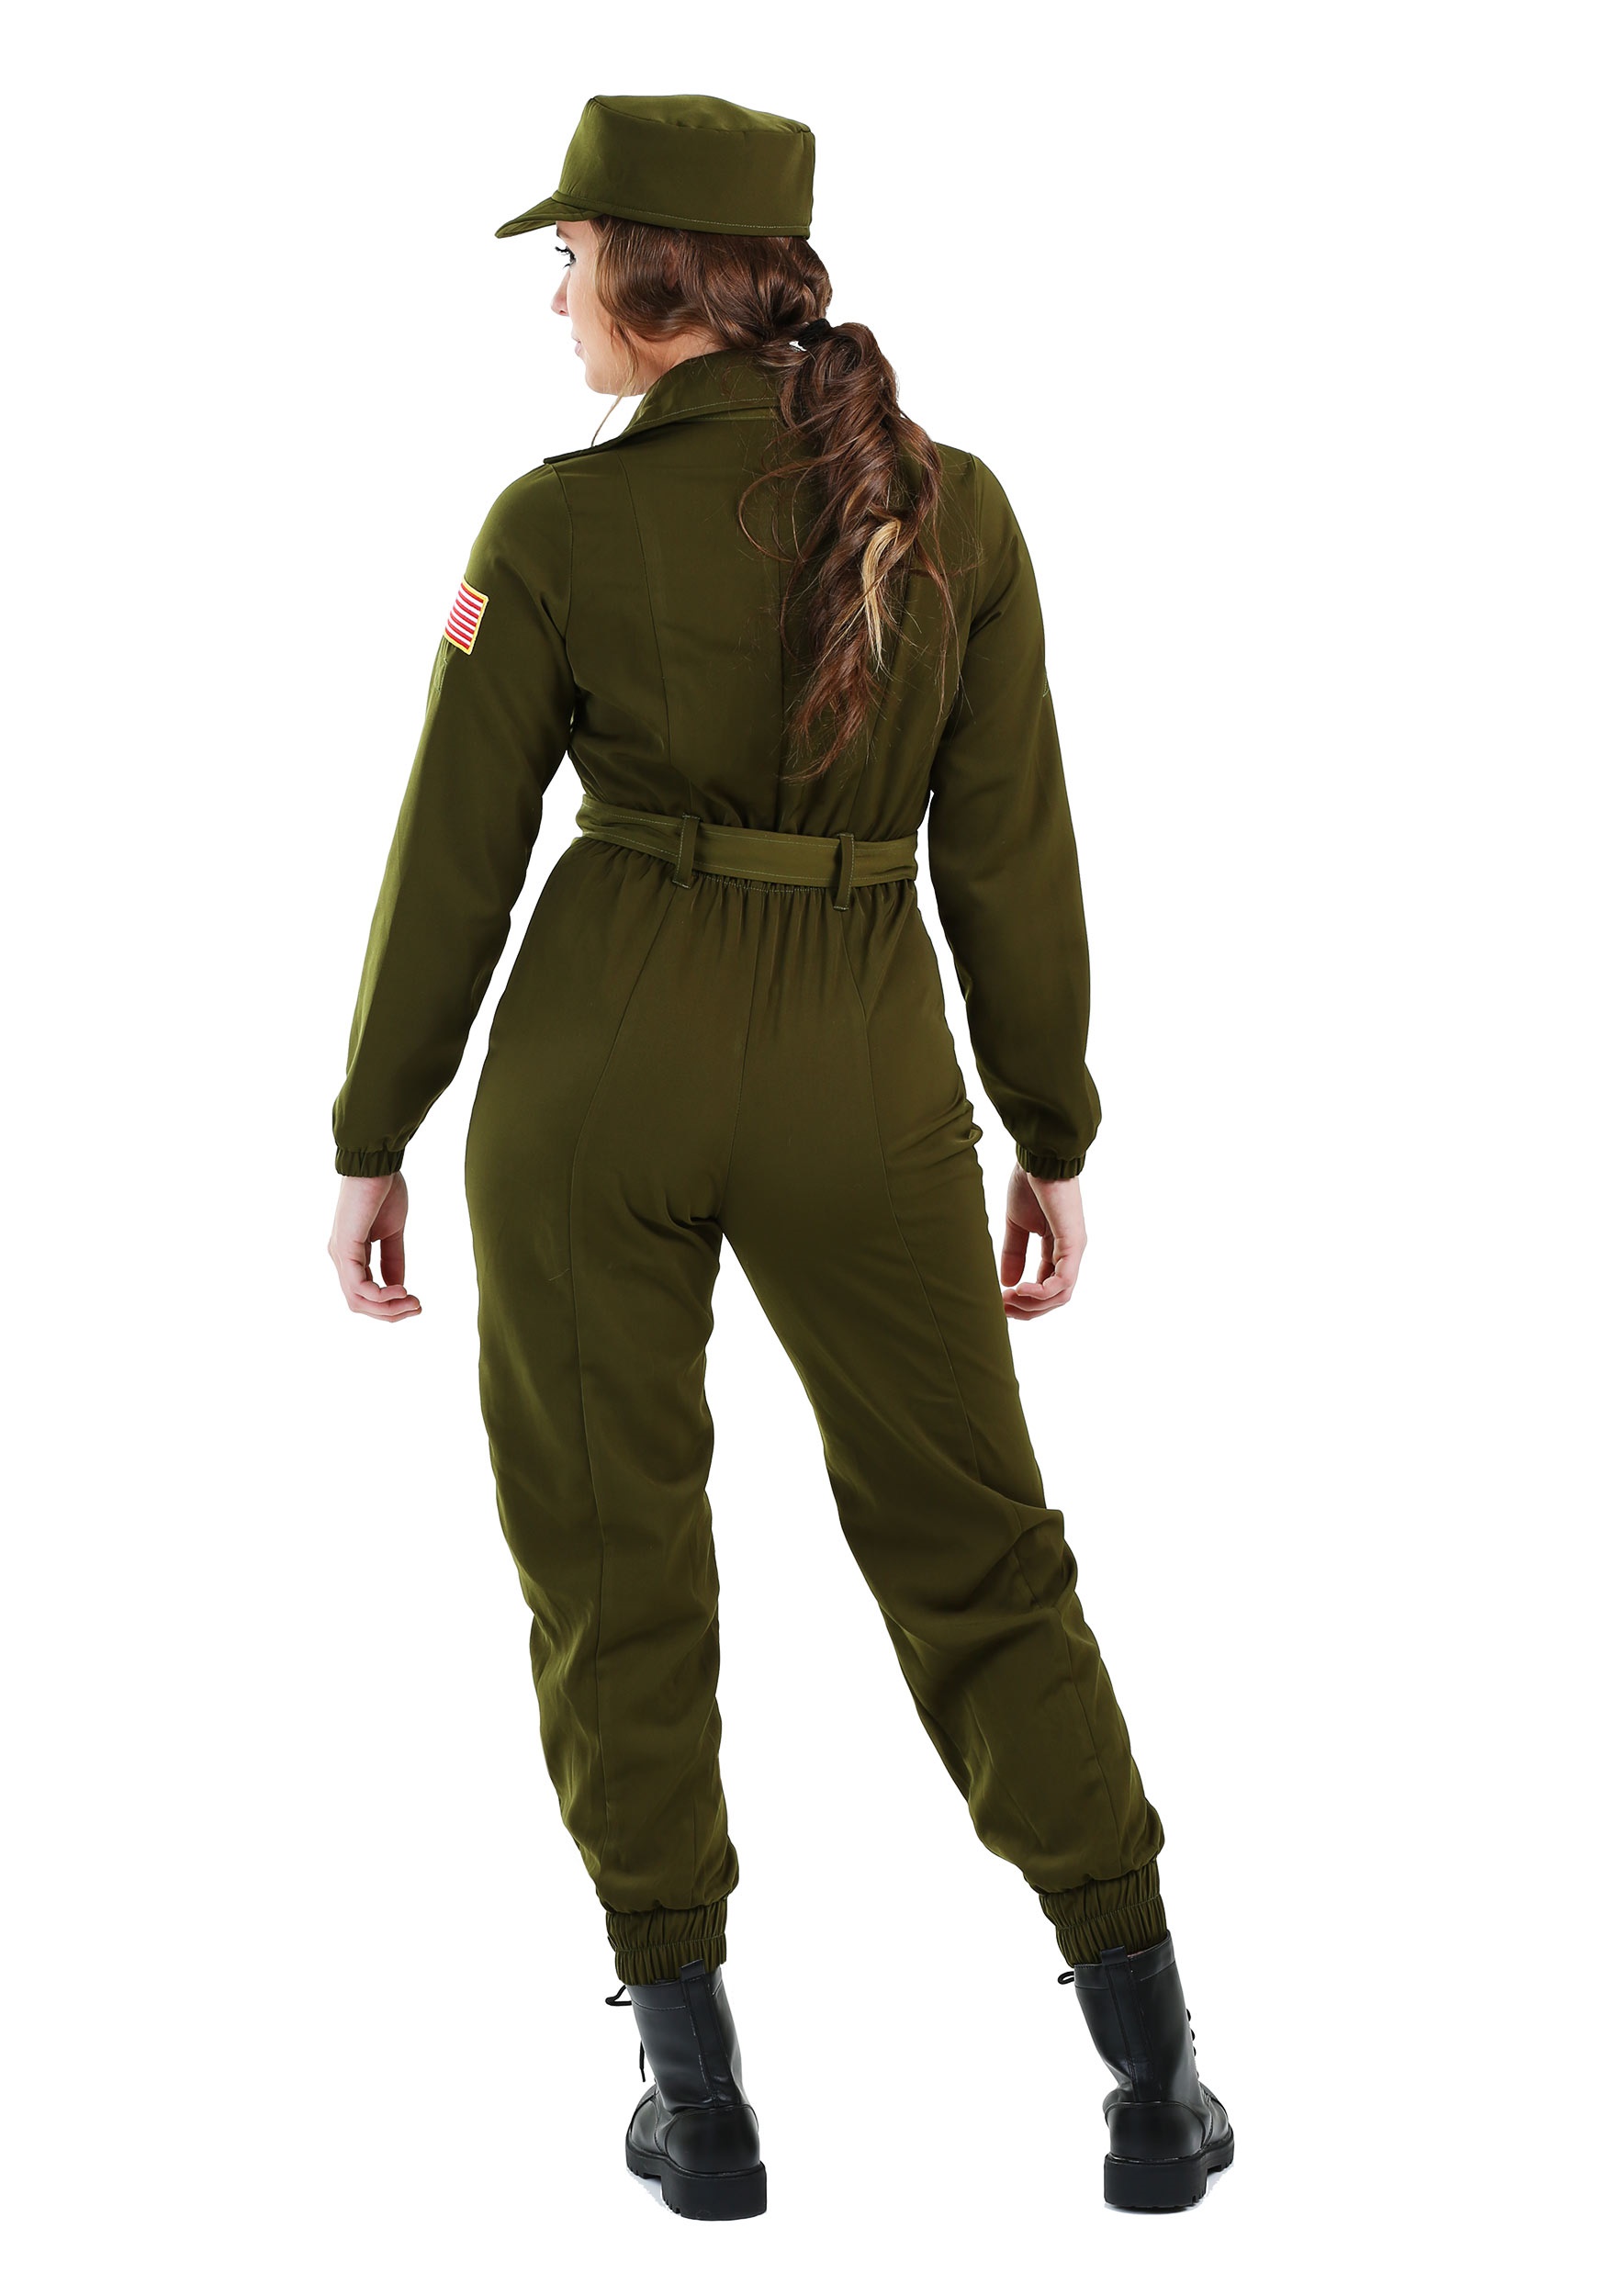 Army Flightsuit Costume For Women , Army Uniform Costumes